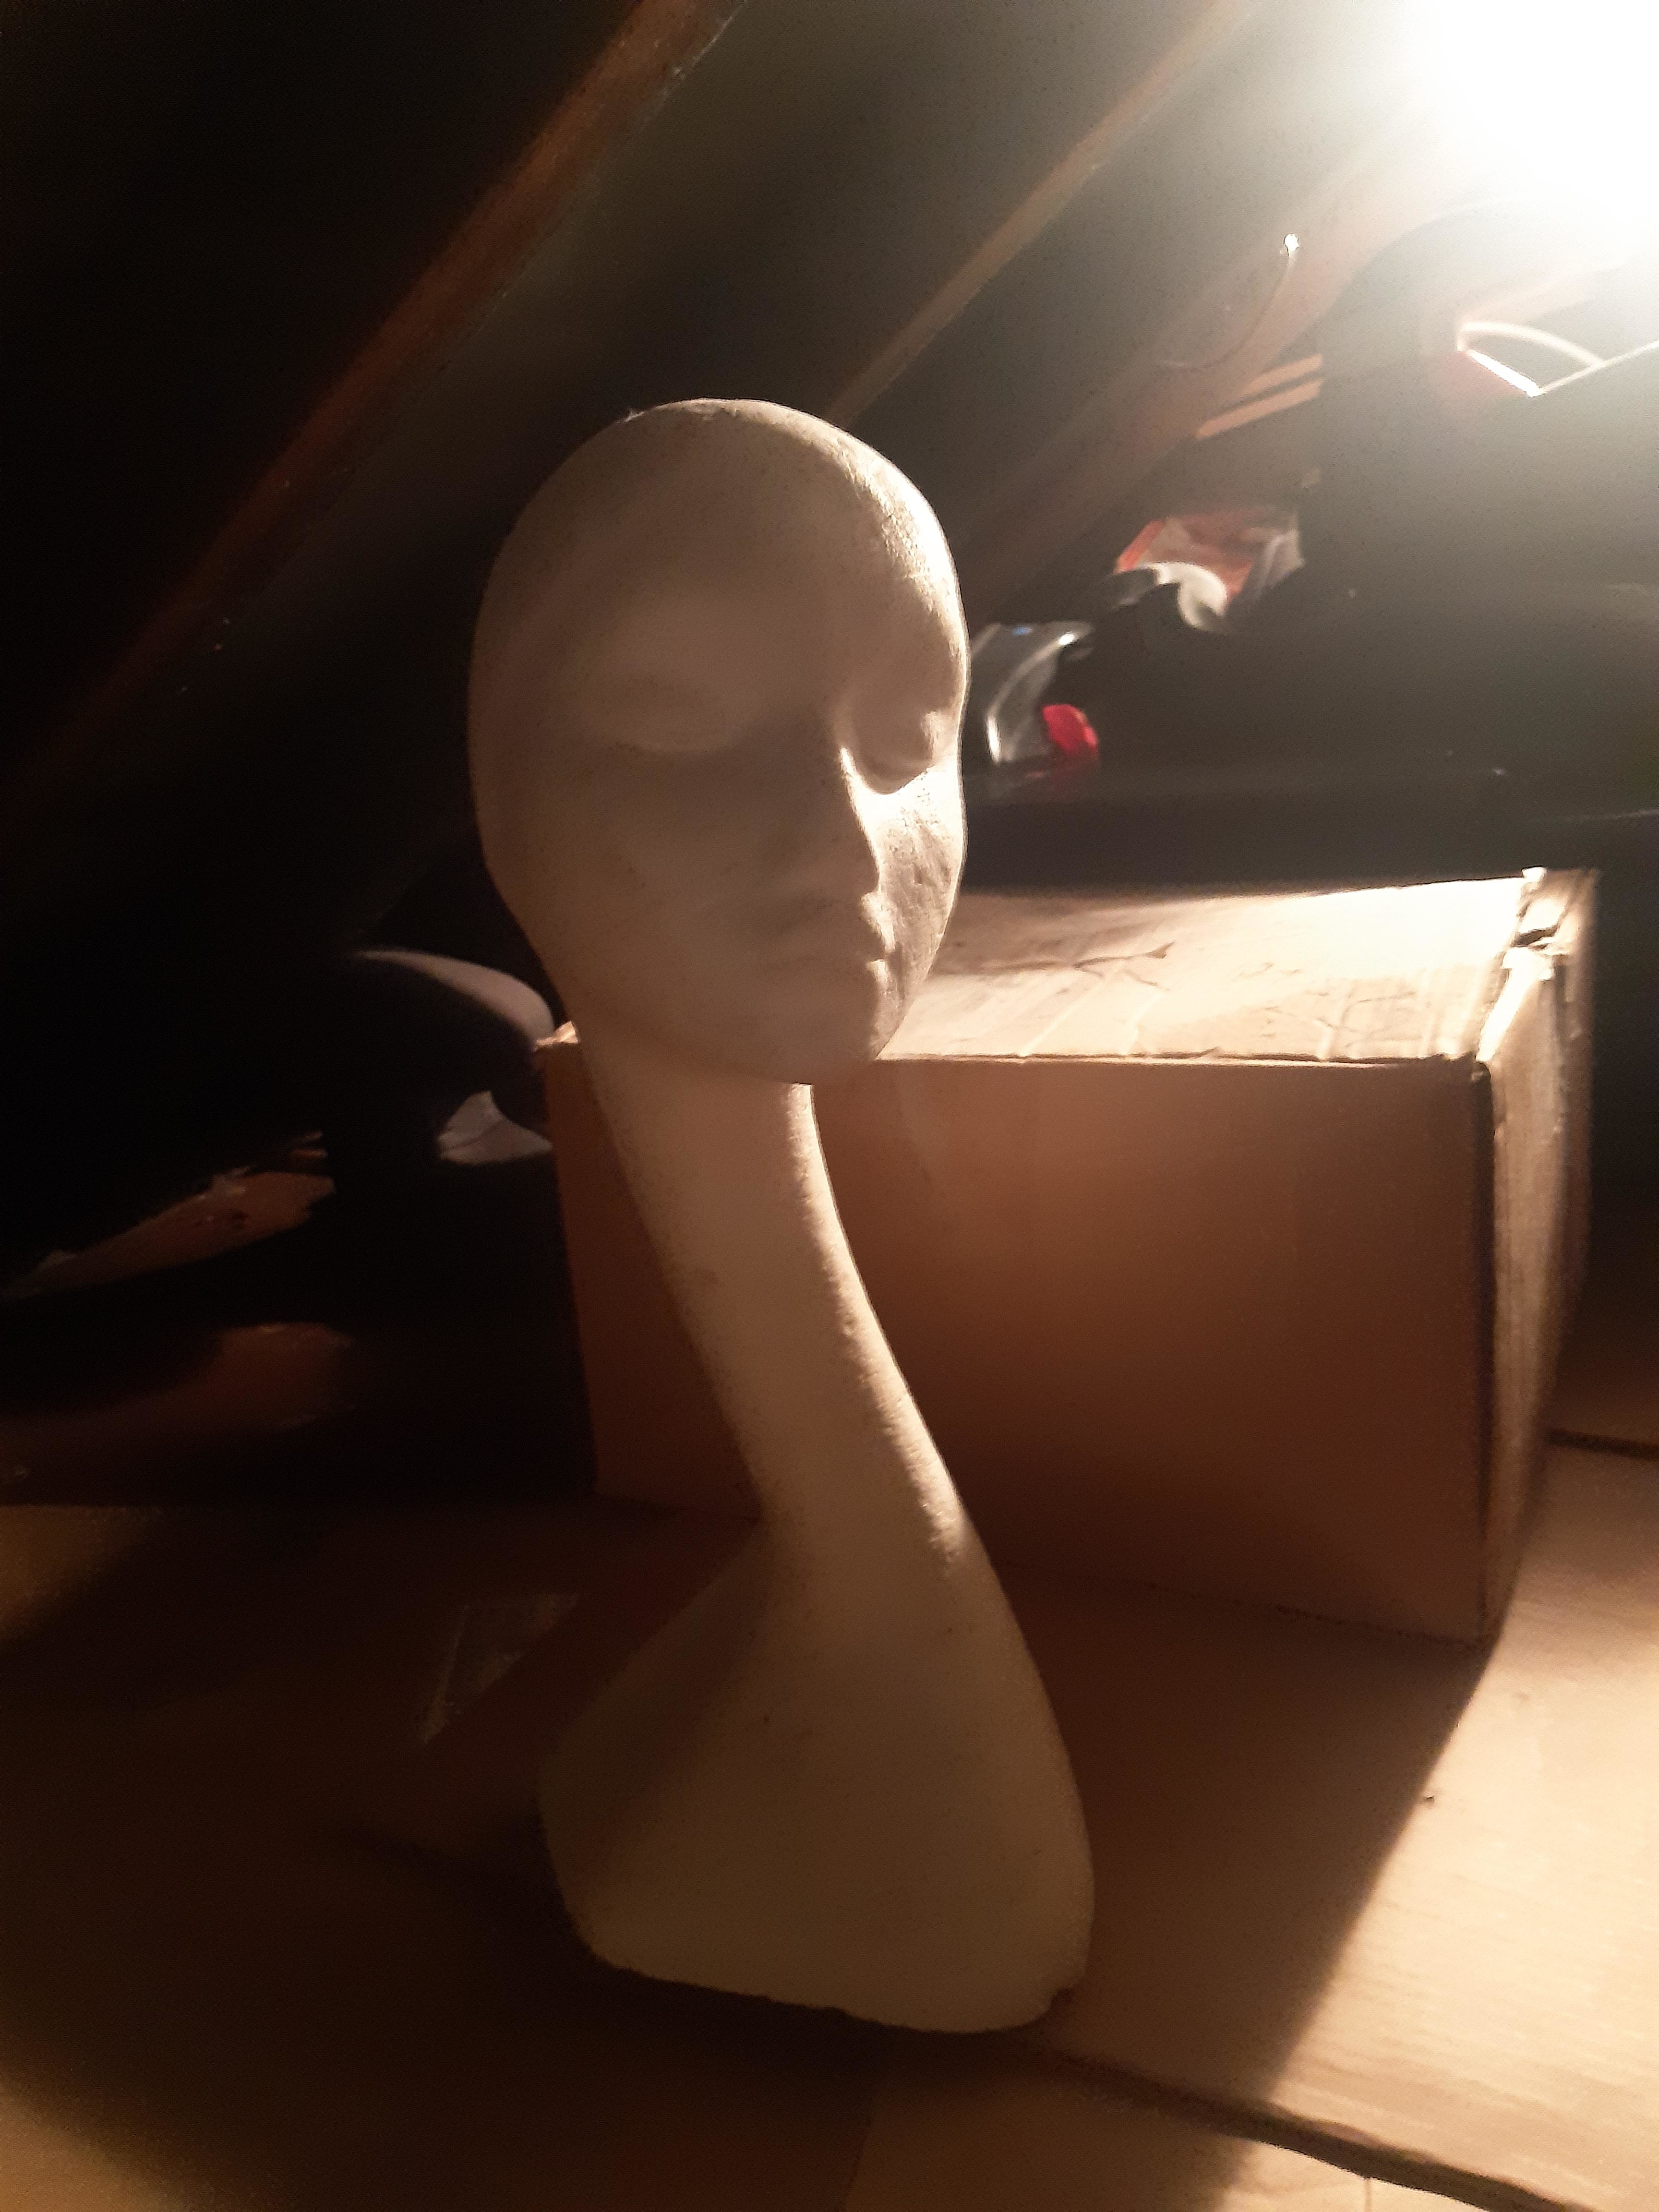 A mannequin head used for hats or wigs is stored in a dimly lit, cluttered space